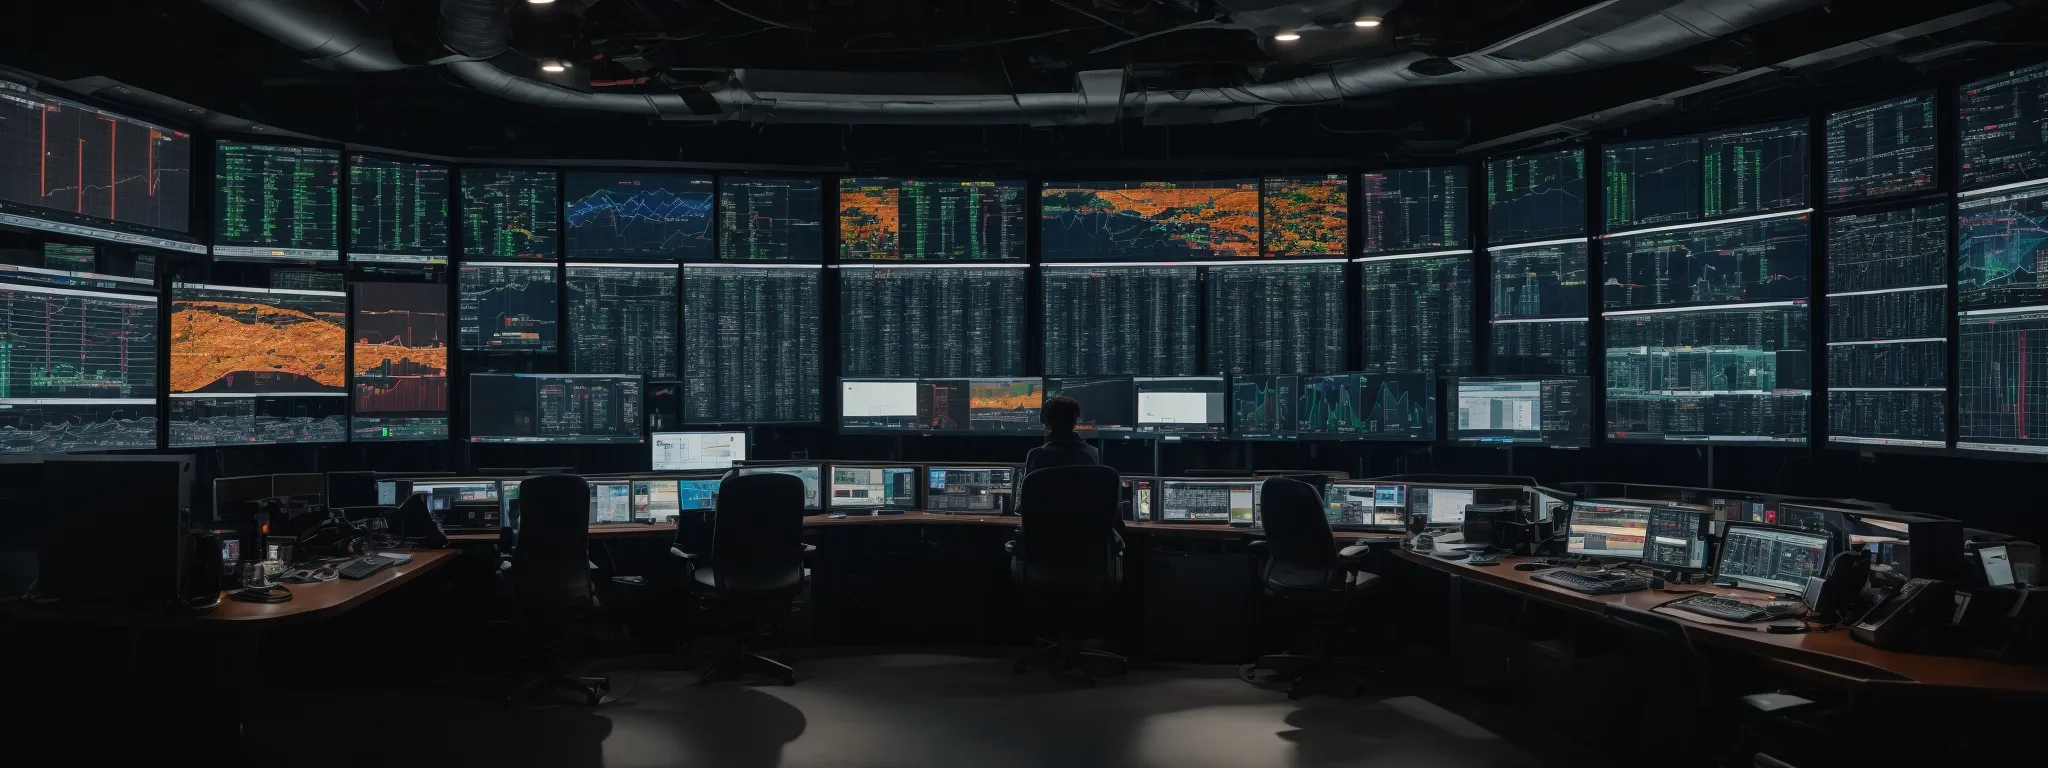 a high-tech control room with multiple screens displaying website analytics and performance metrics.